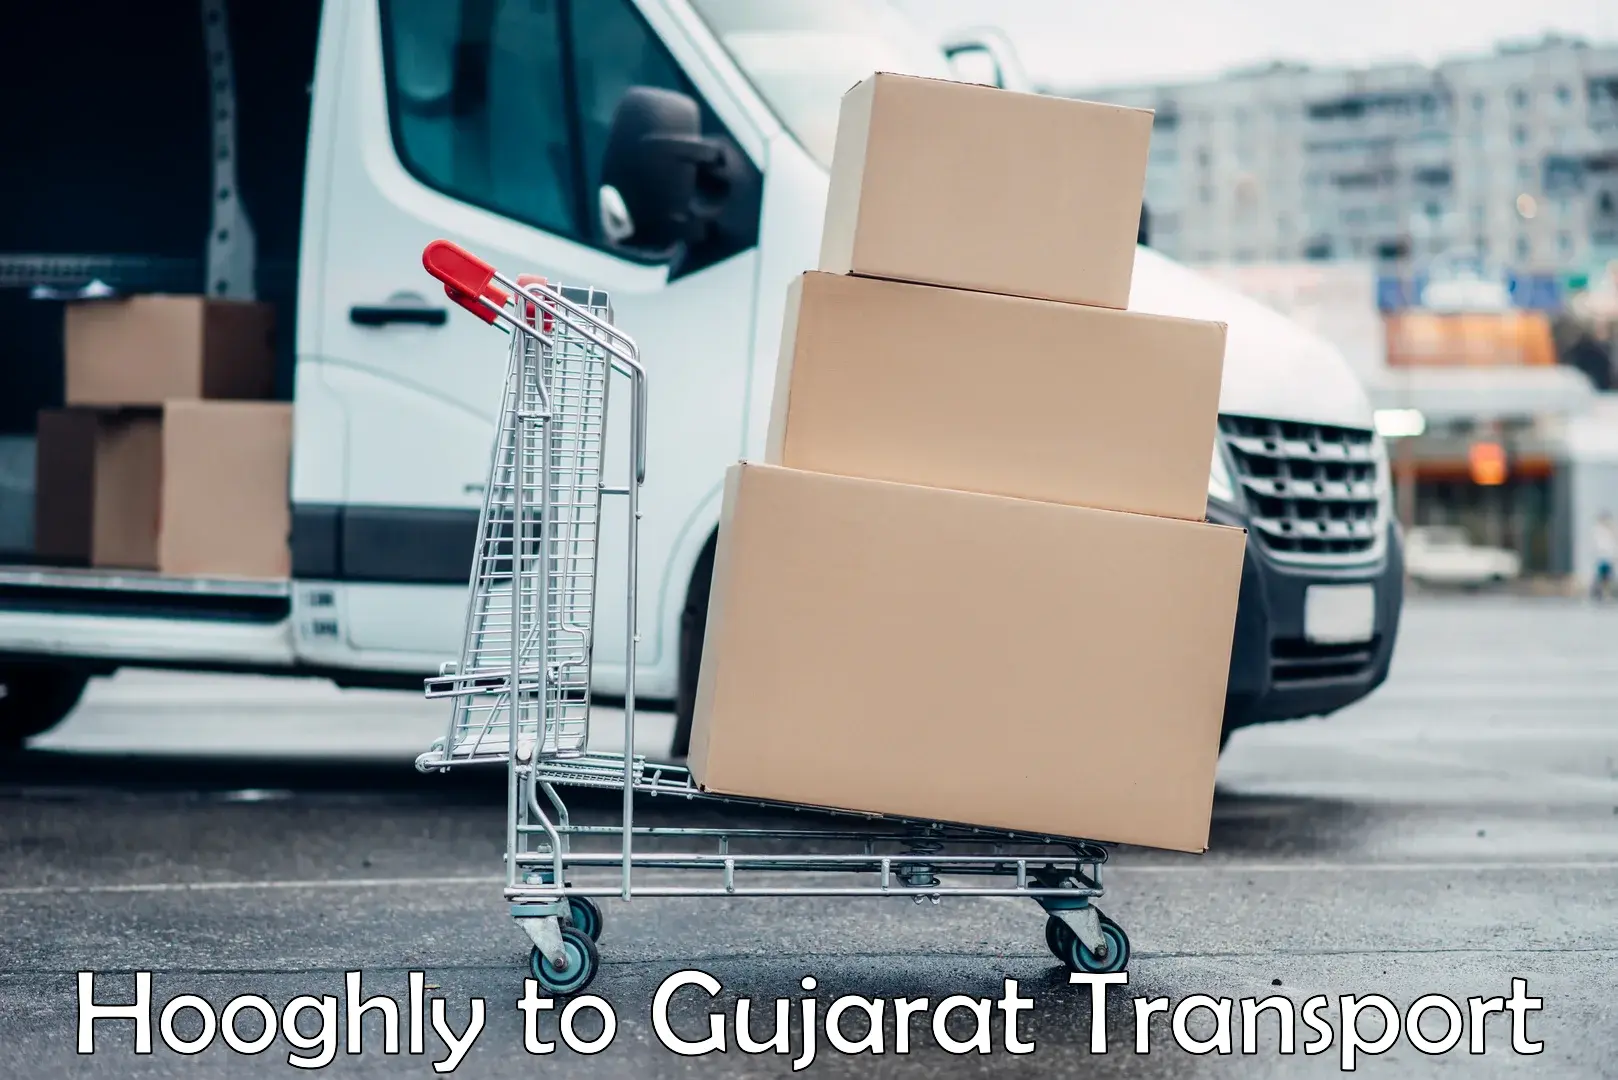 Online transport booking Hooghly to Valsad